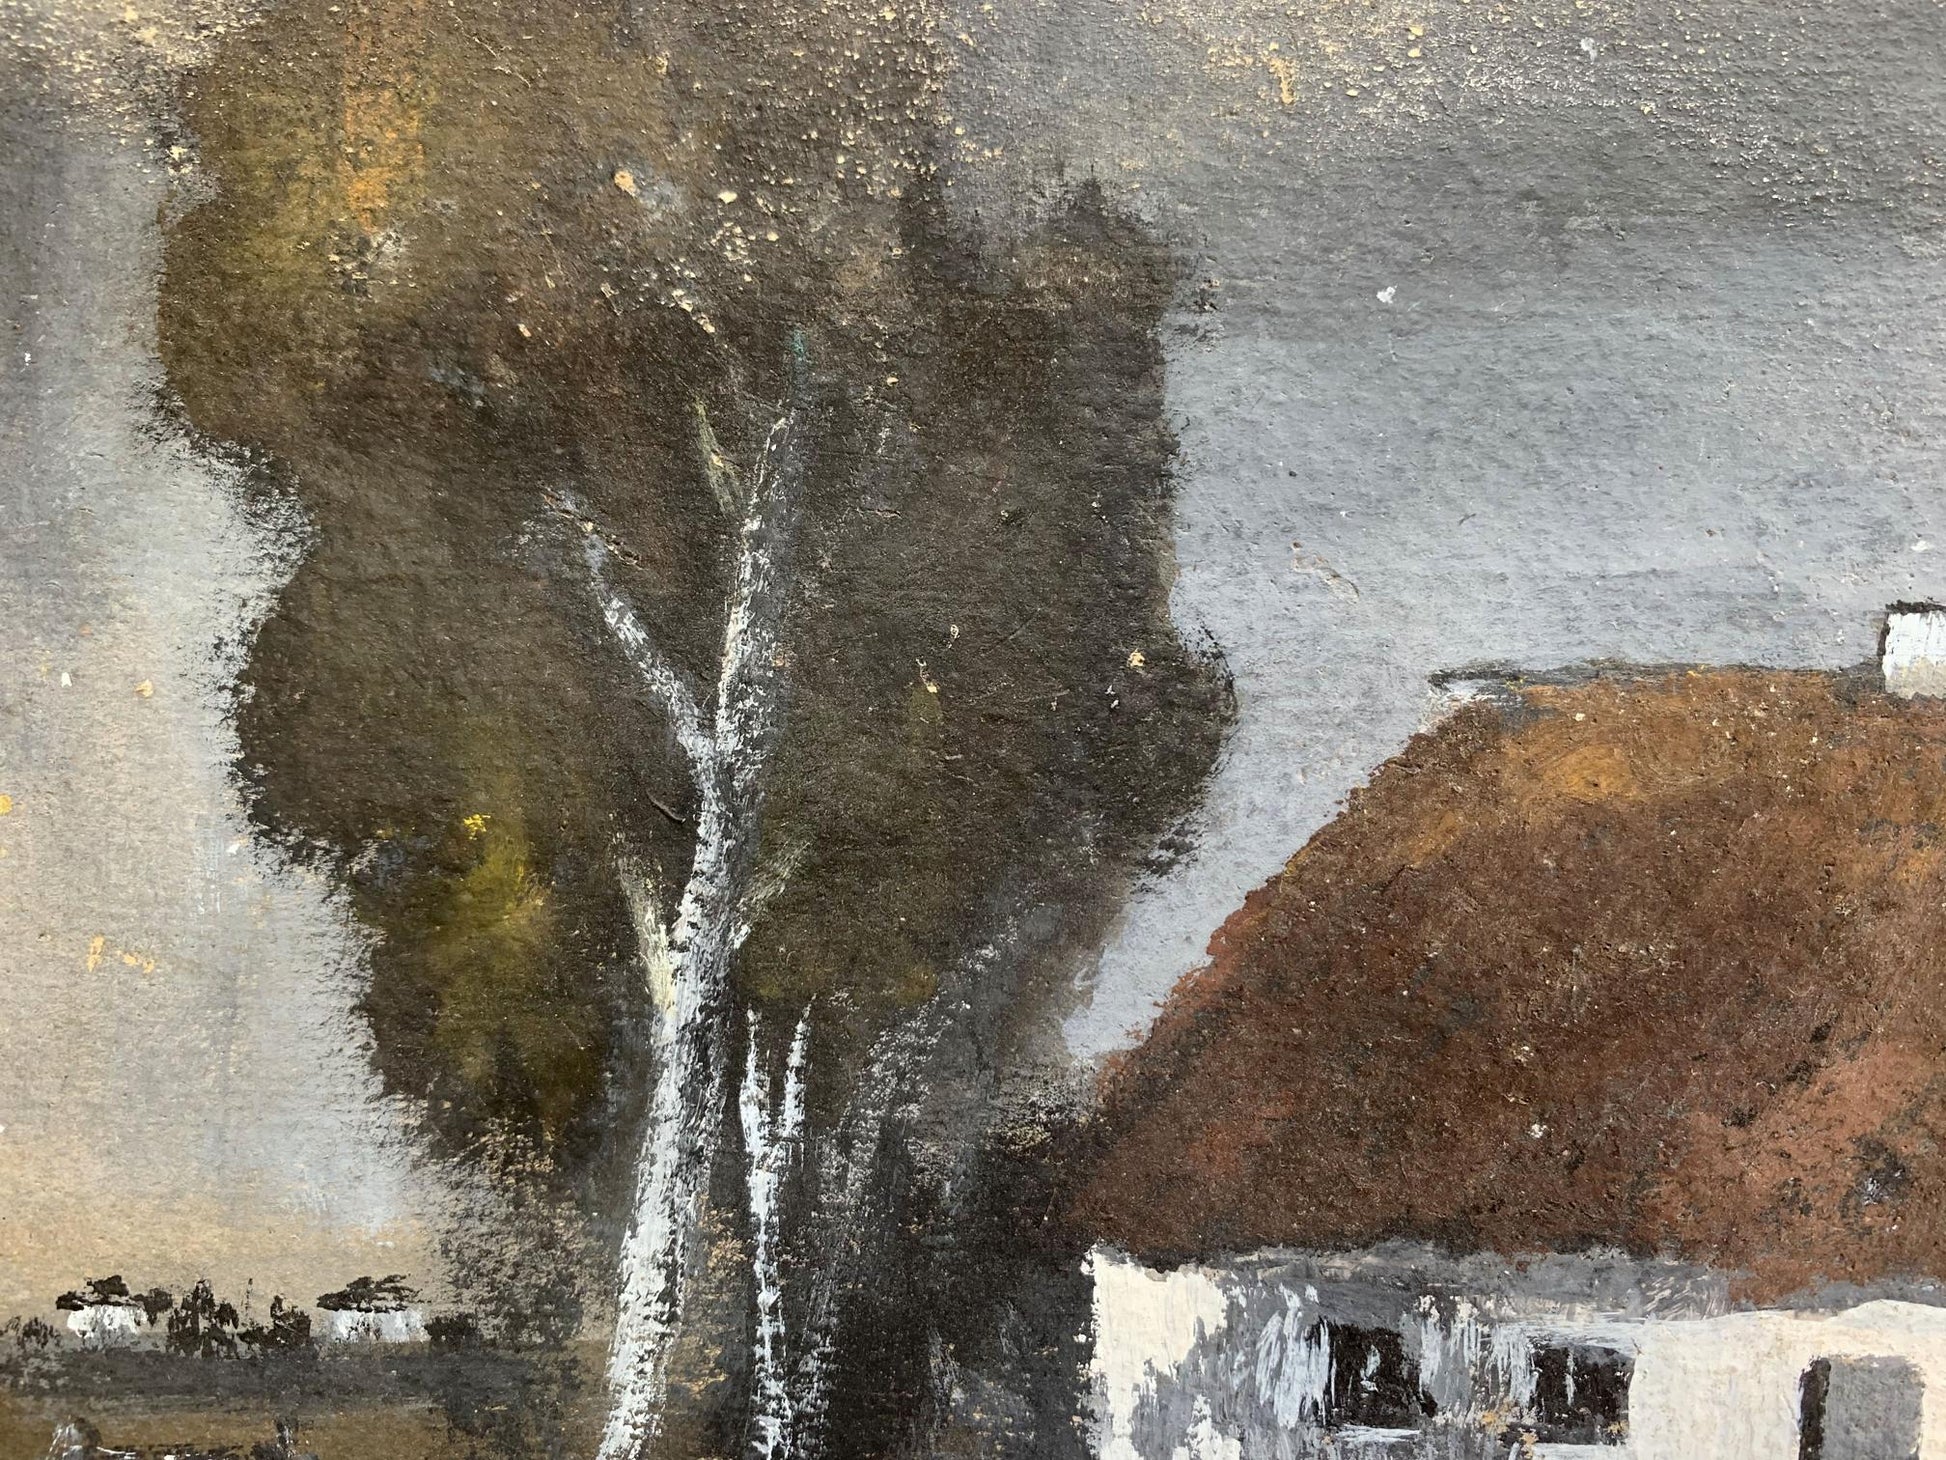 Alexander Khorov presents an oil painting depicting a landscape with a house